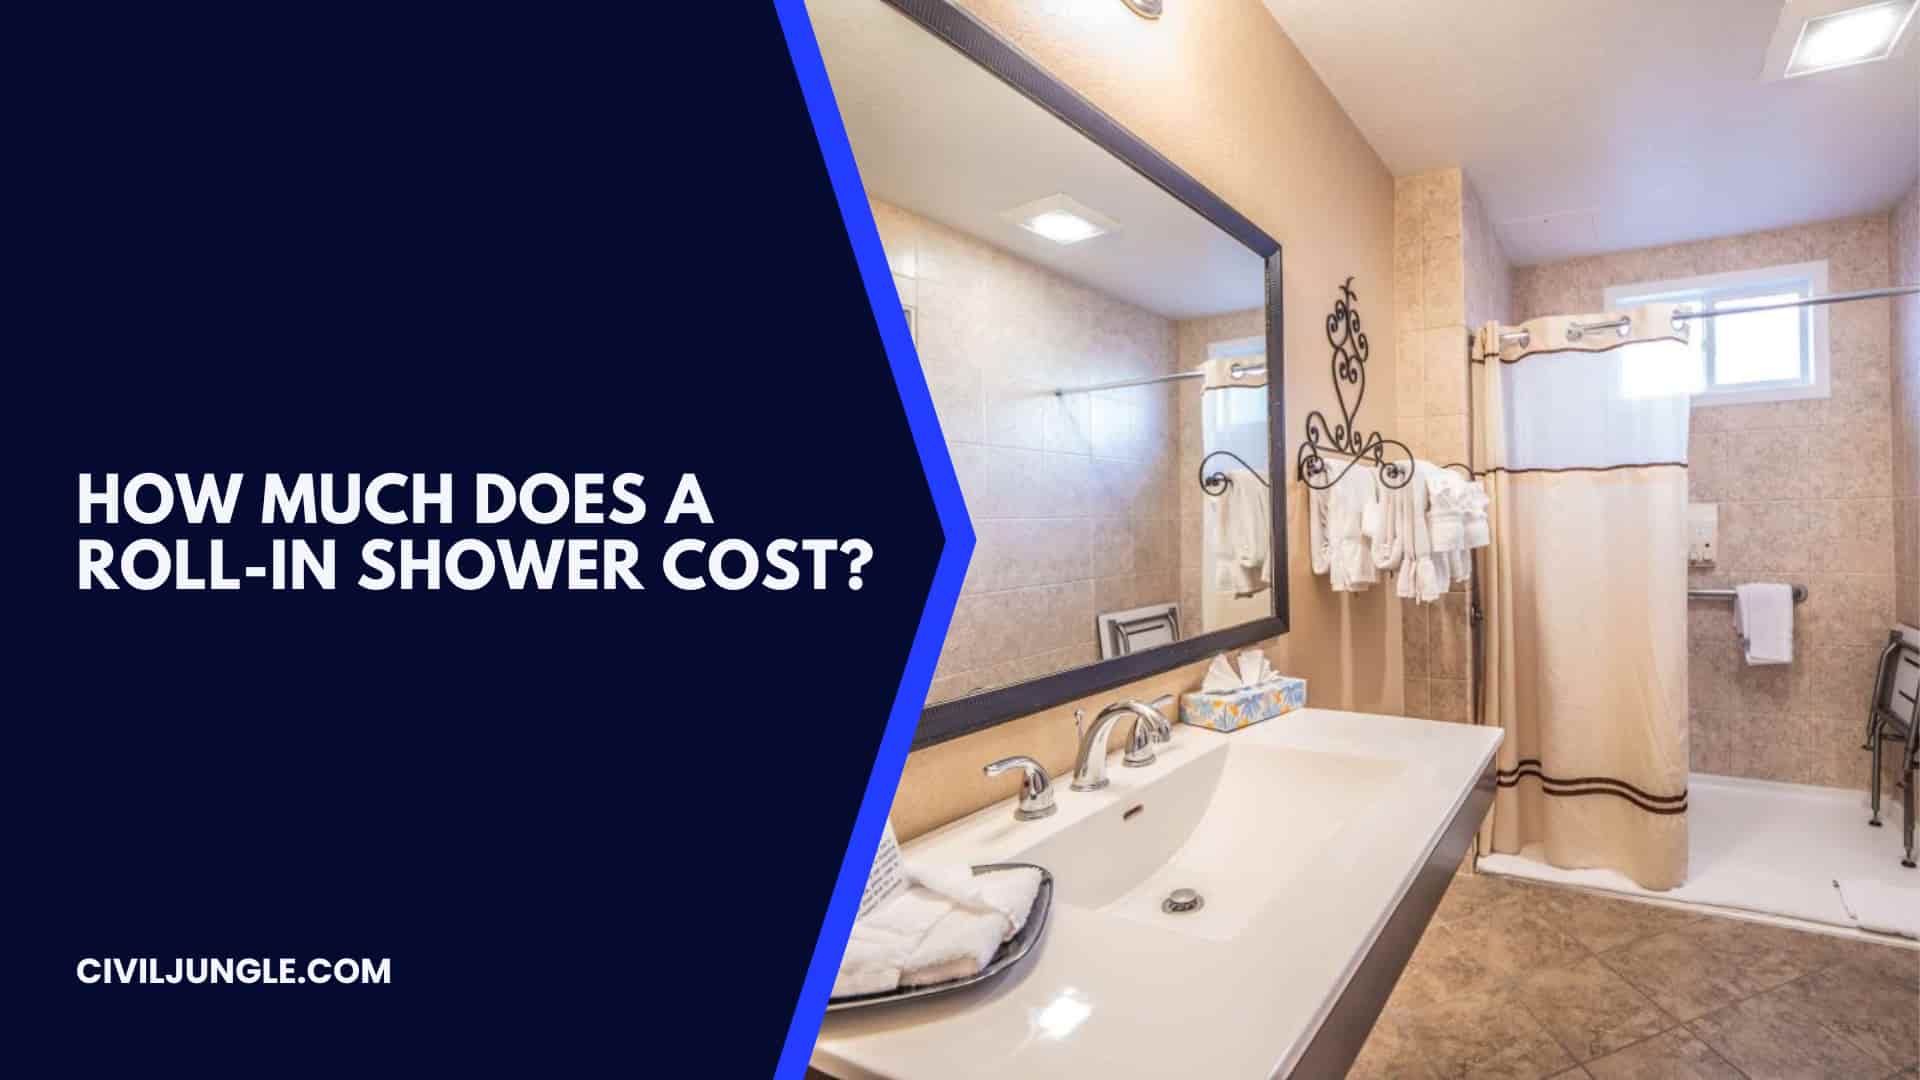 How Much Does a Roll-in Shower Cost?